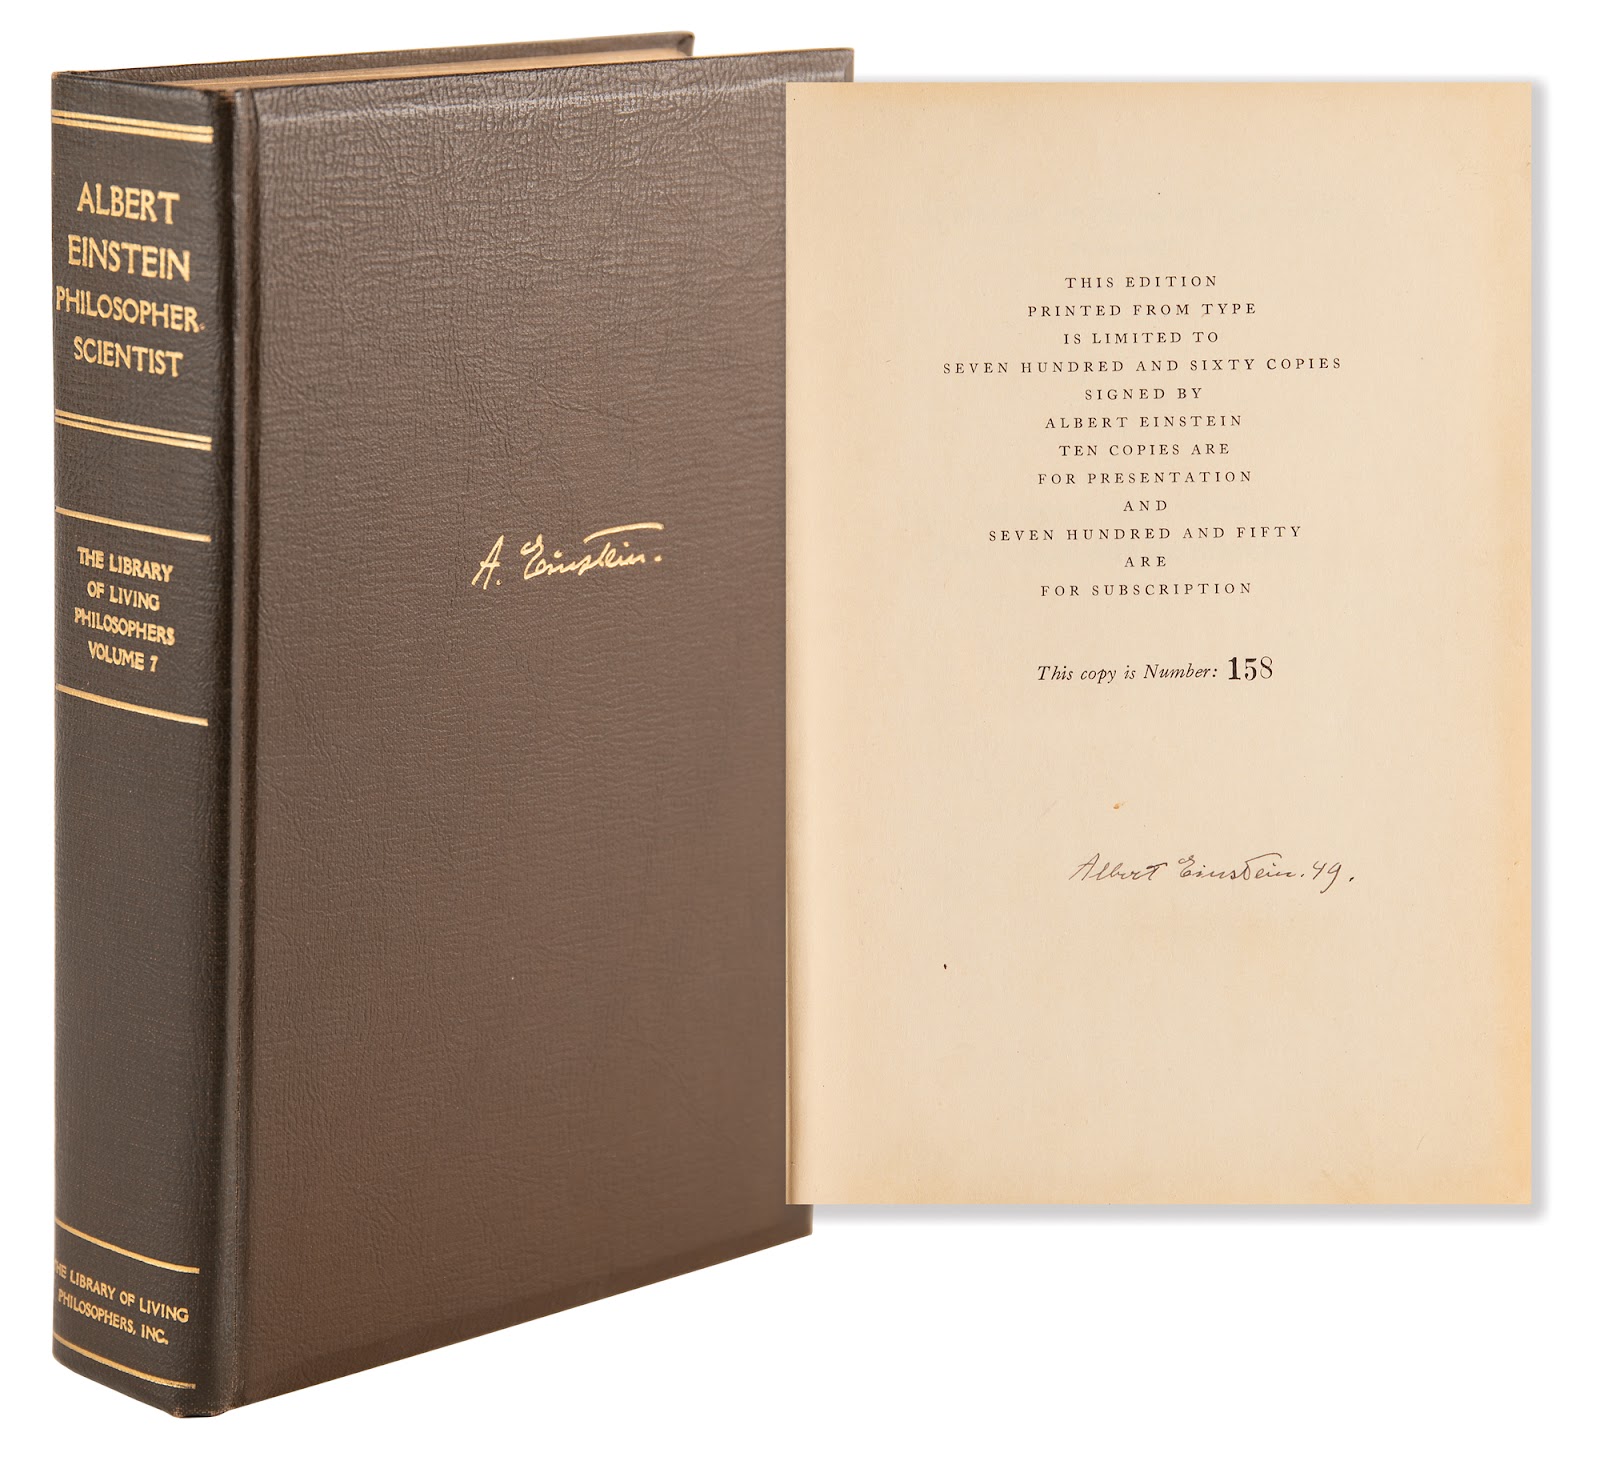 Limited edition book titled Albert Einstein: Philosopher-Scientist signed by the subject on the colophon.